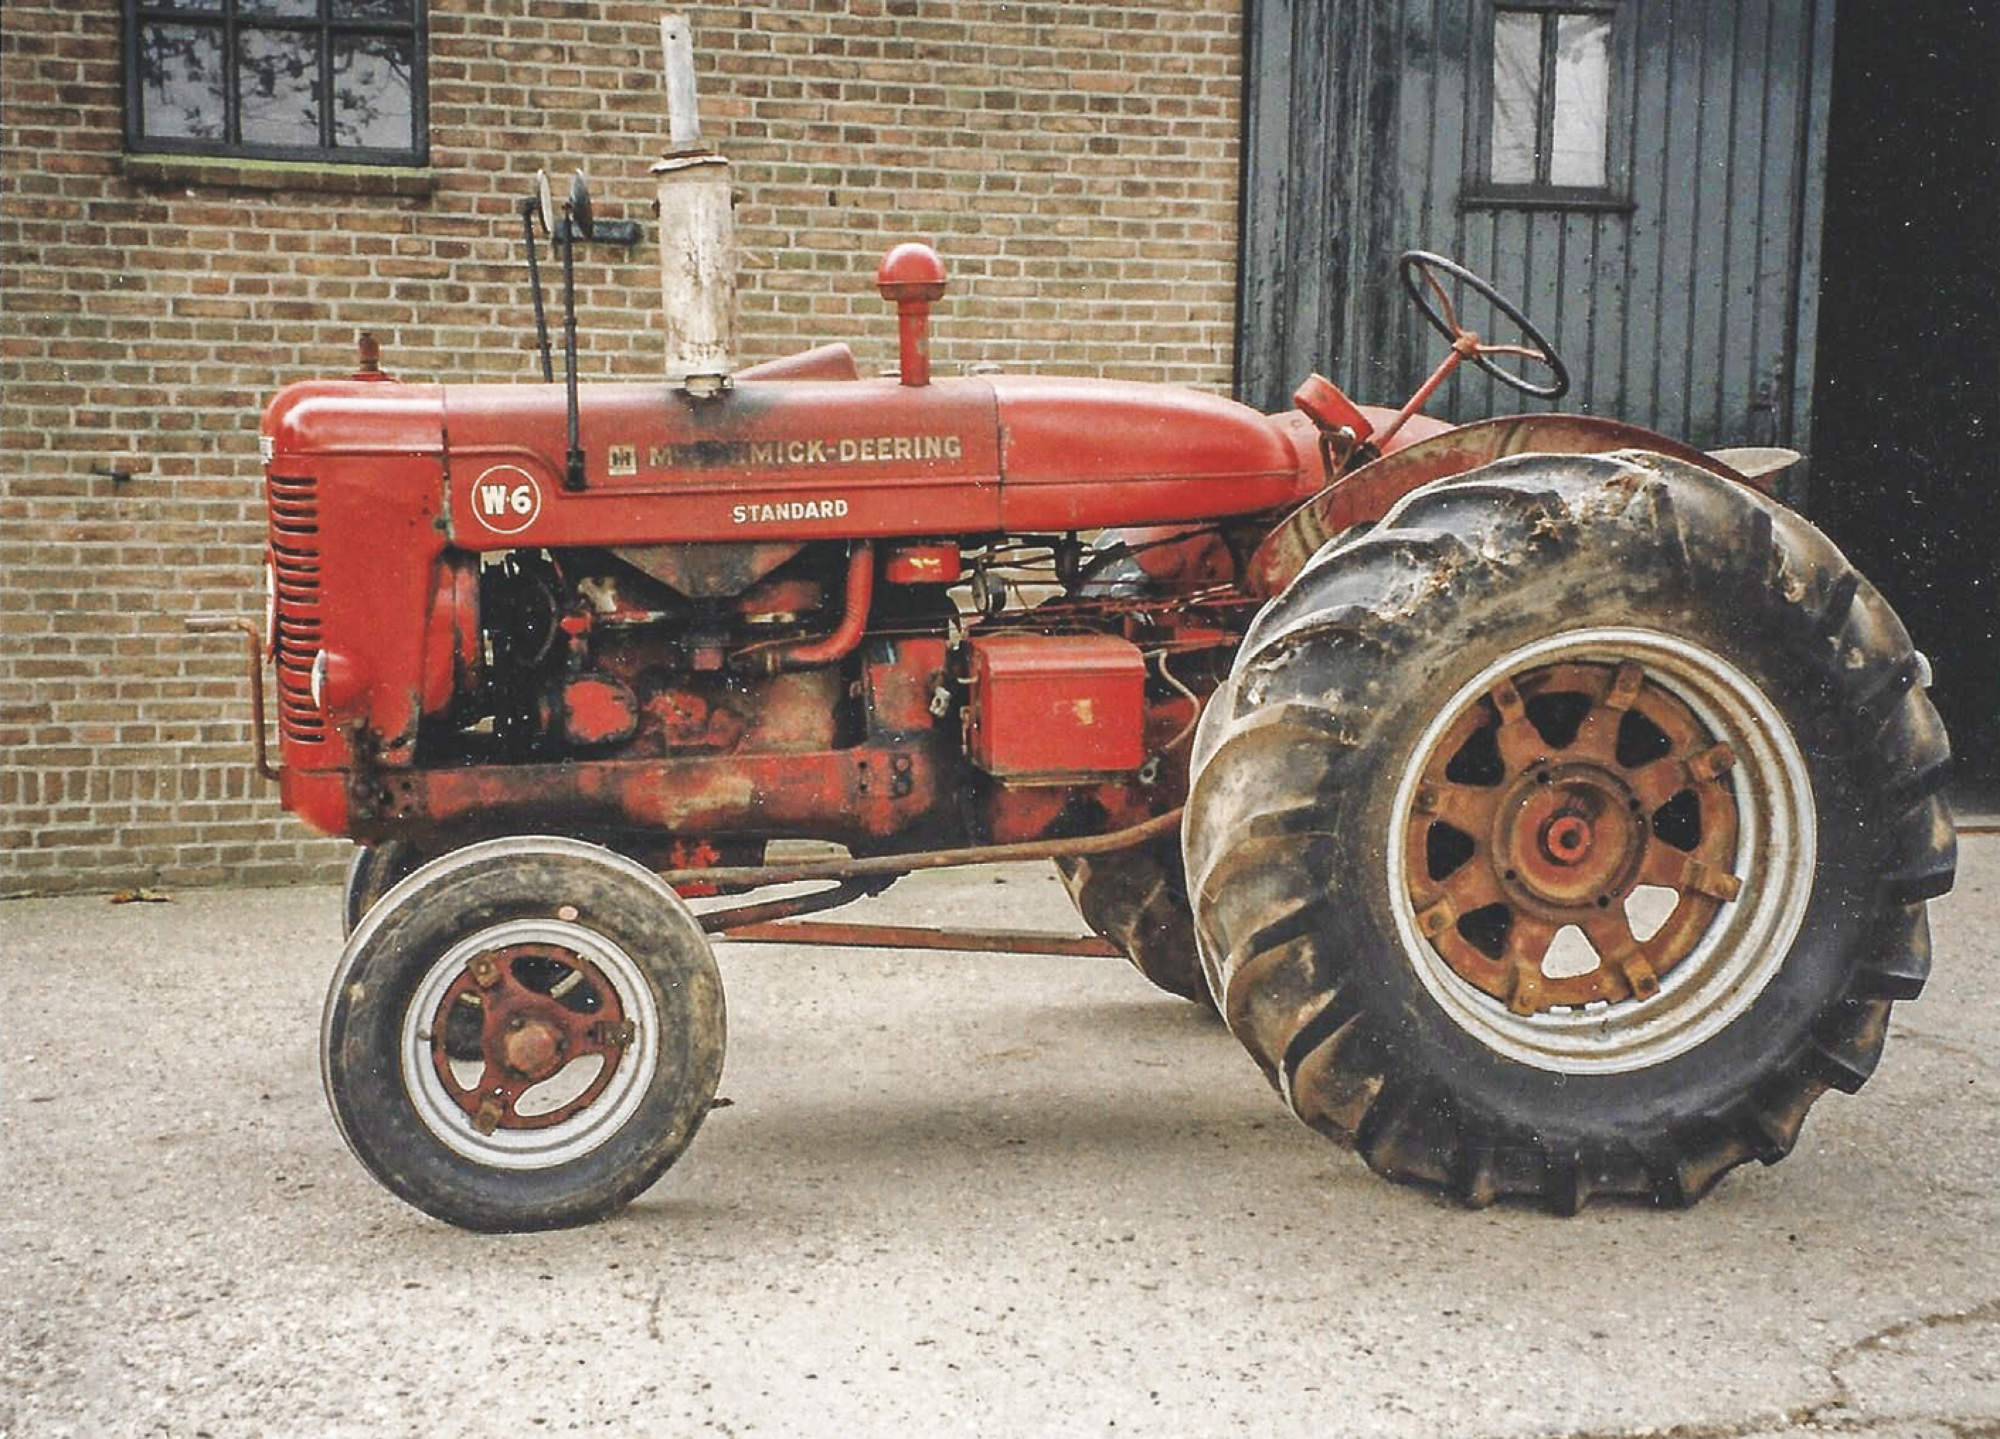 The McCormick Deering W-6, classed as a ‘plow tractor’ had five forward gears.